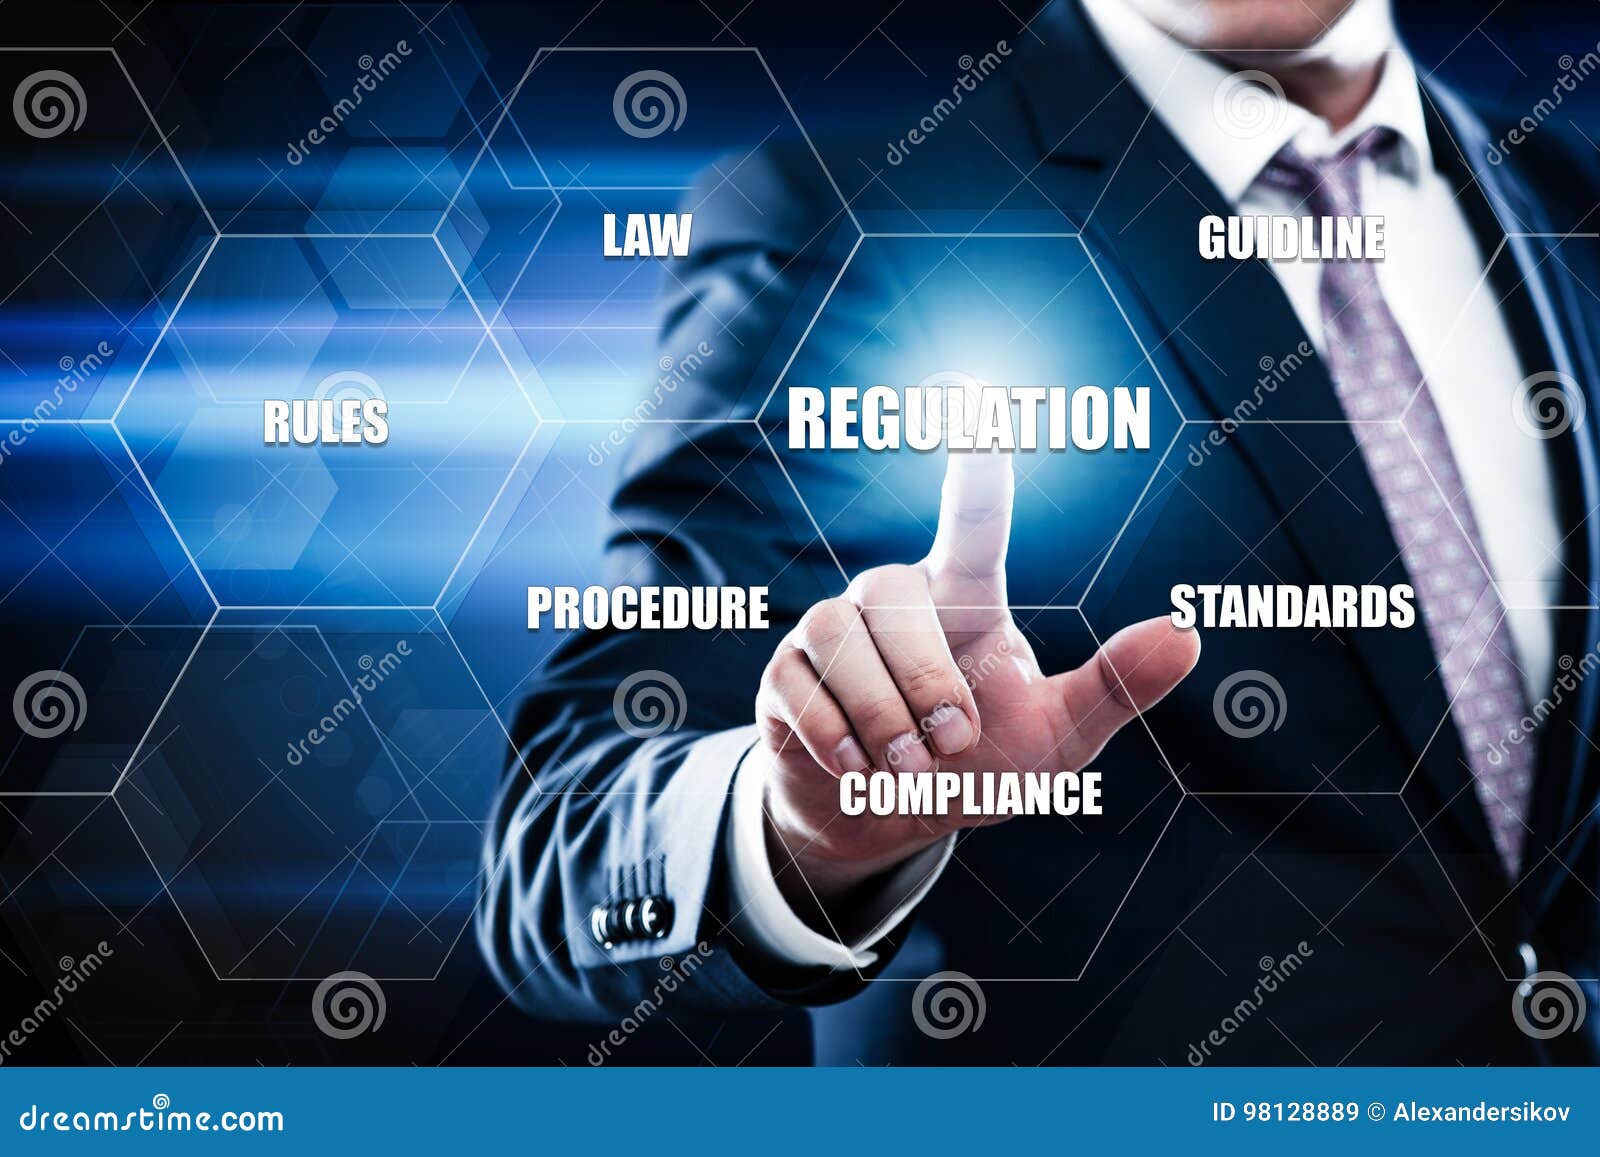 regulation compliance rules law standard business technology concept